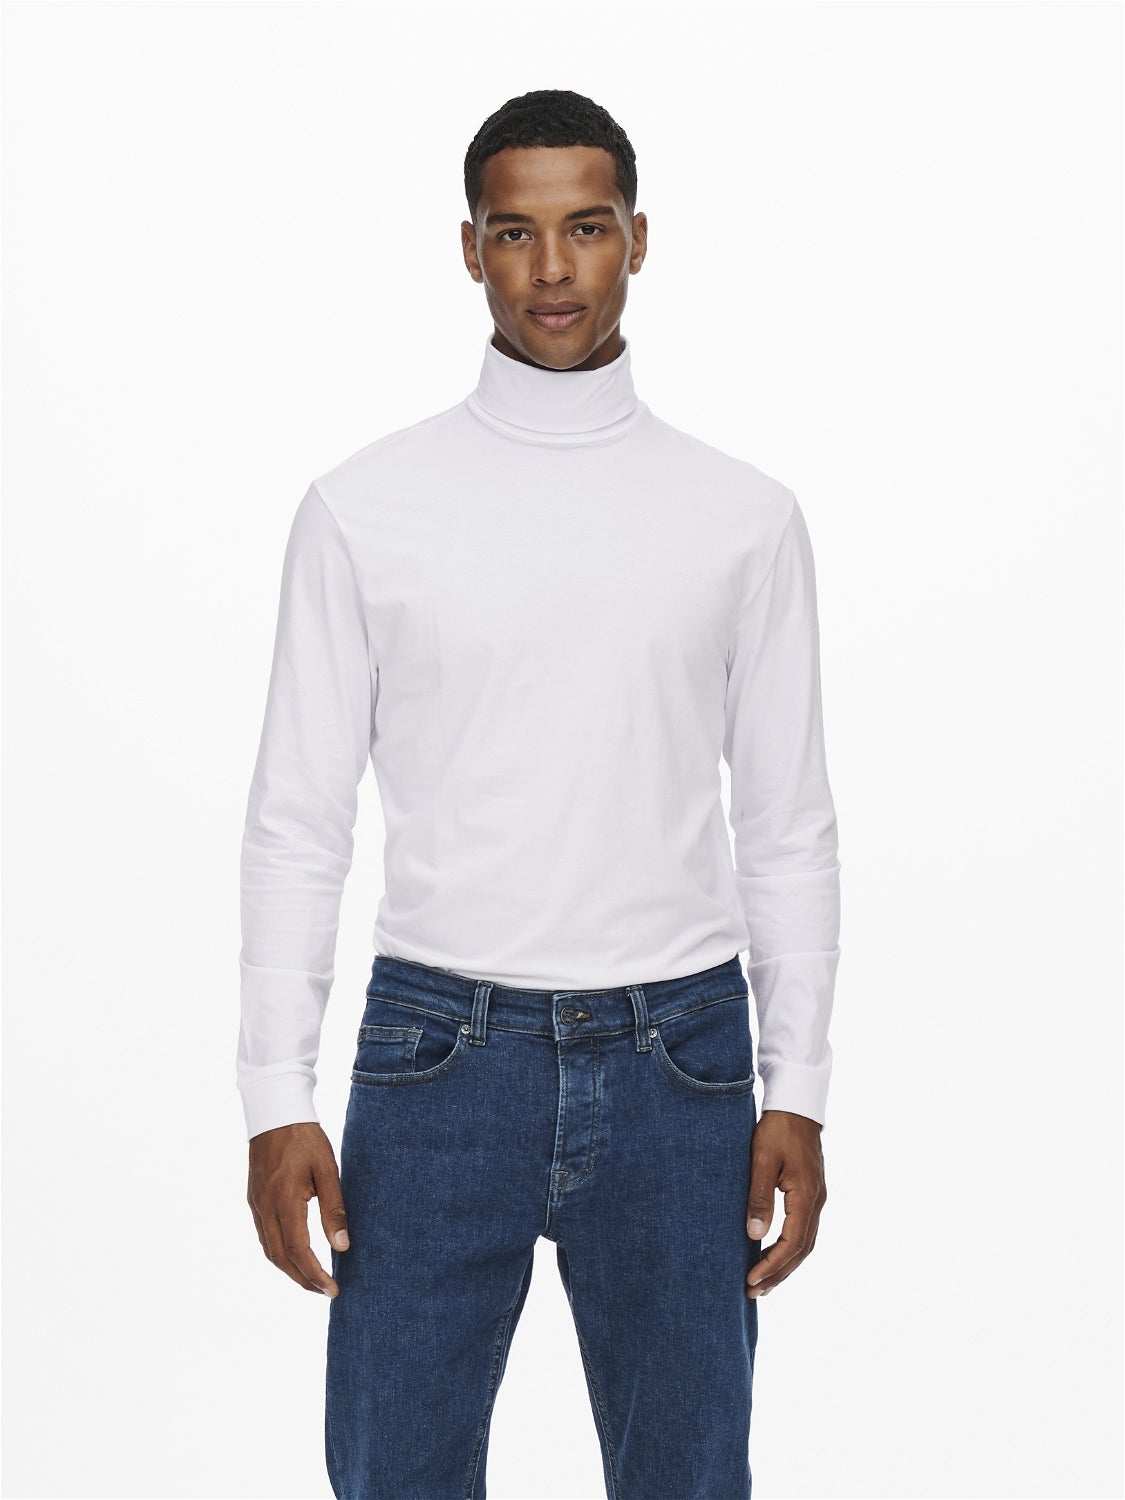 Long sleeved rollneck t-shirt | White | ONLY & SONS®